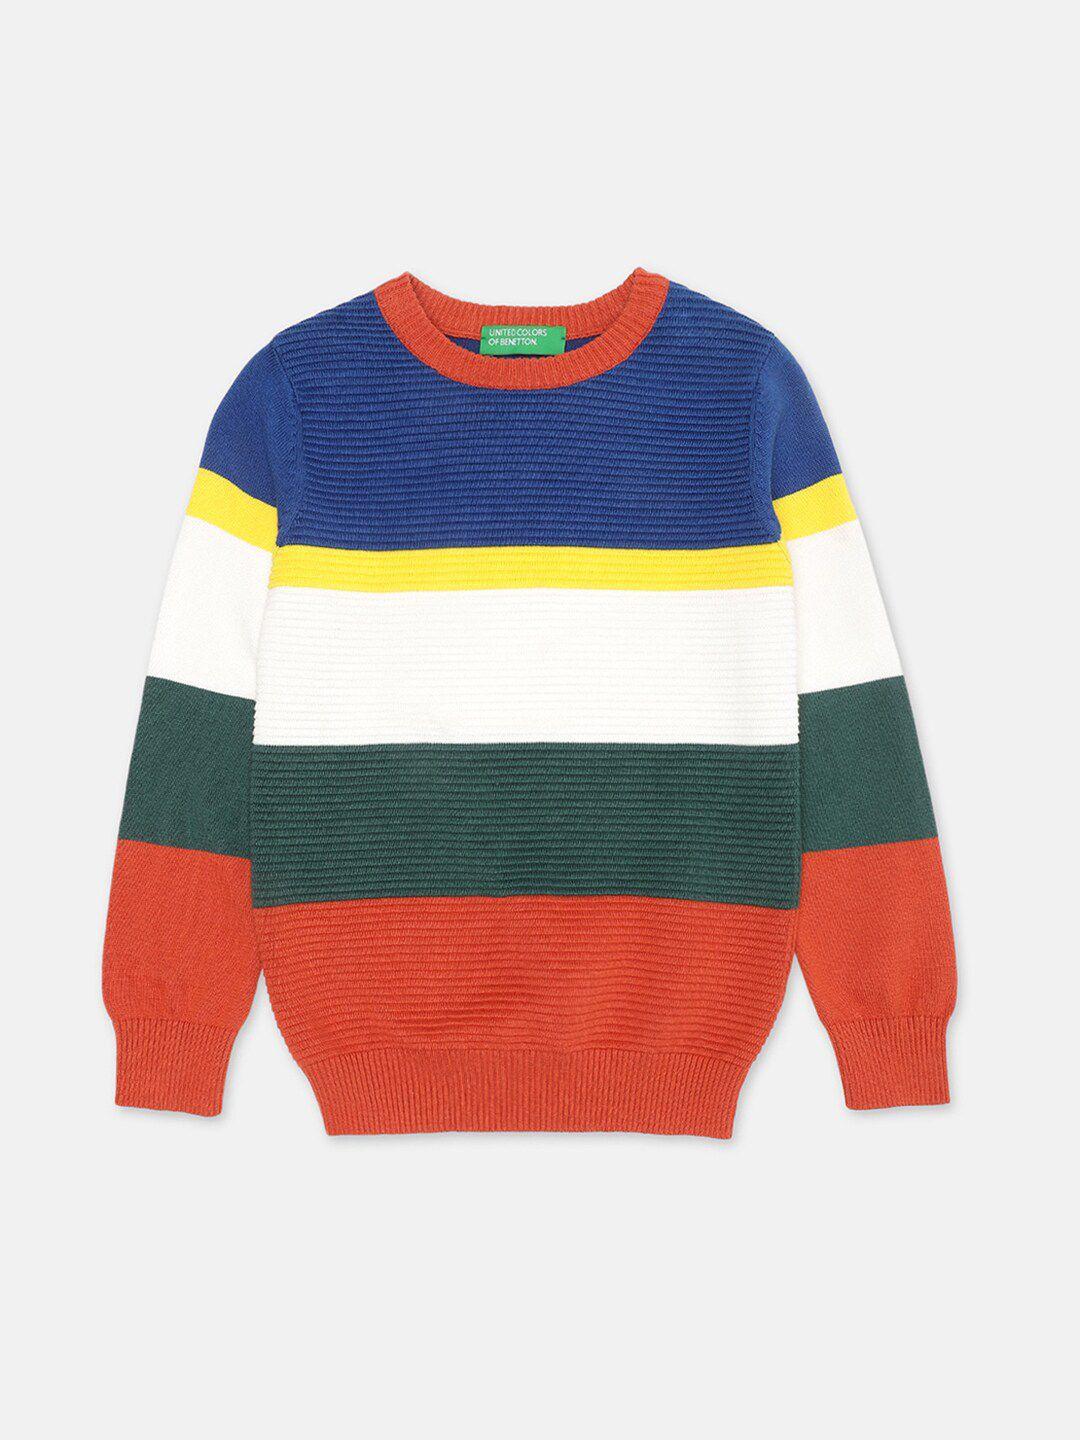 United Colors of Benetton Boys White & Blue Striped Pullover